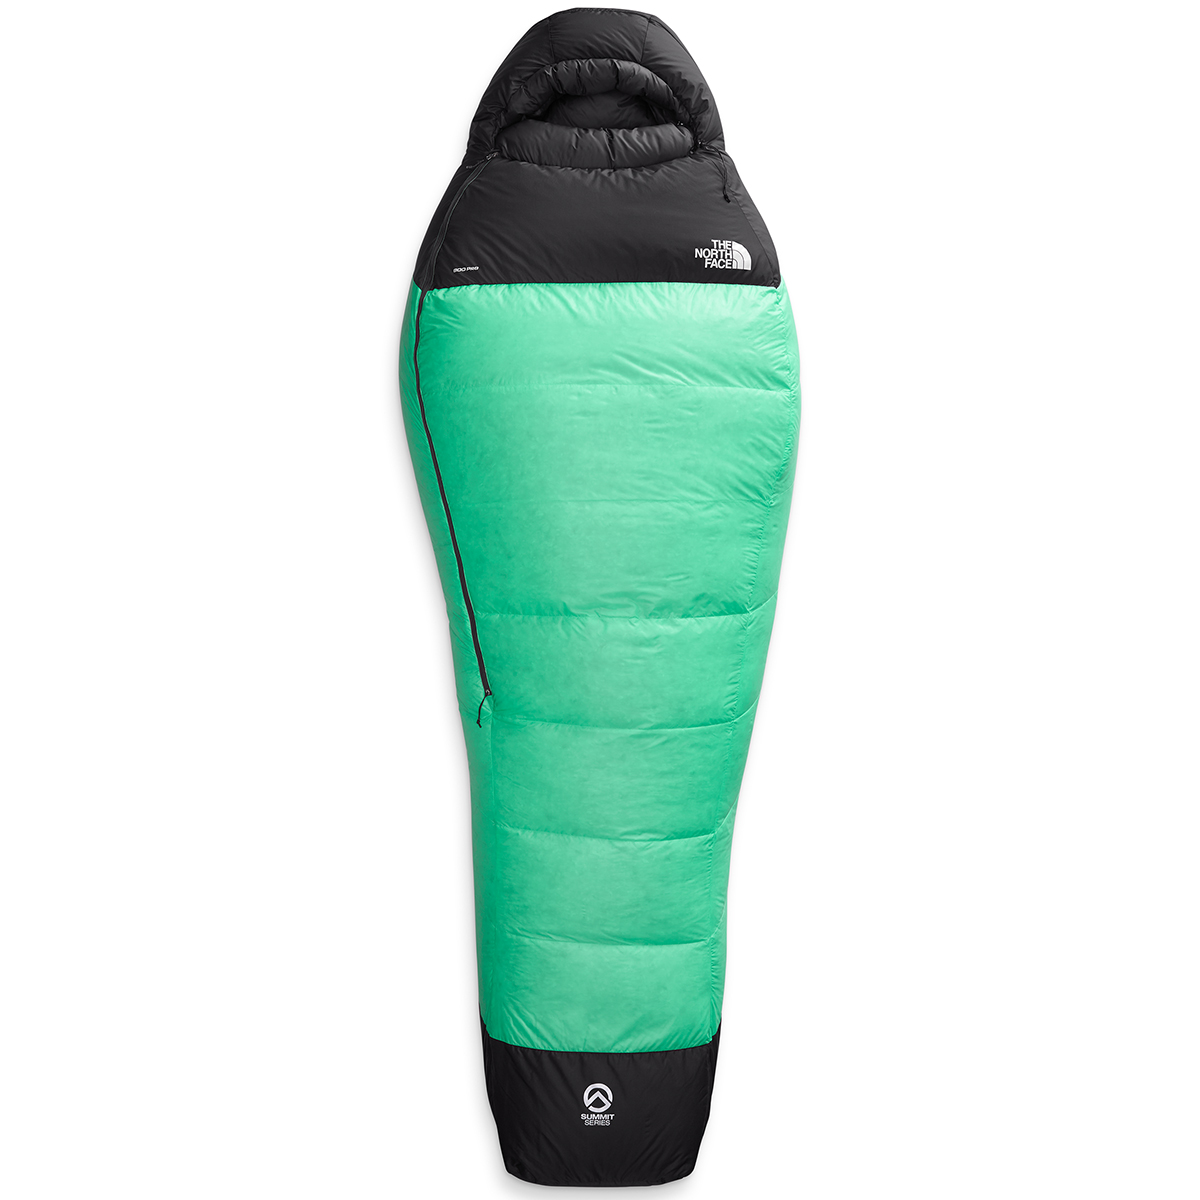 The North Face Inferno 0 Degree/-18C Sleeping Bag